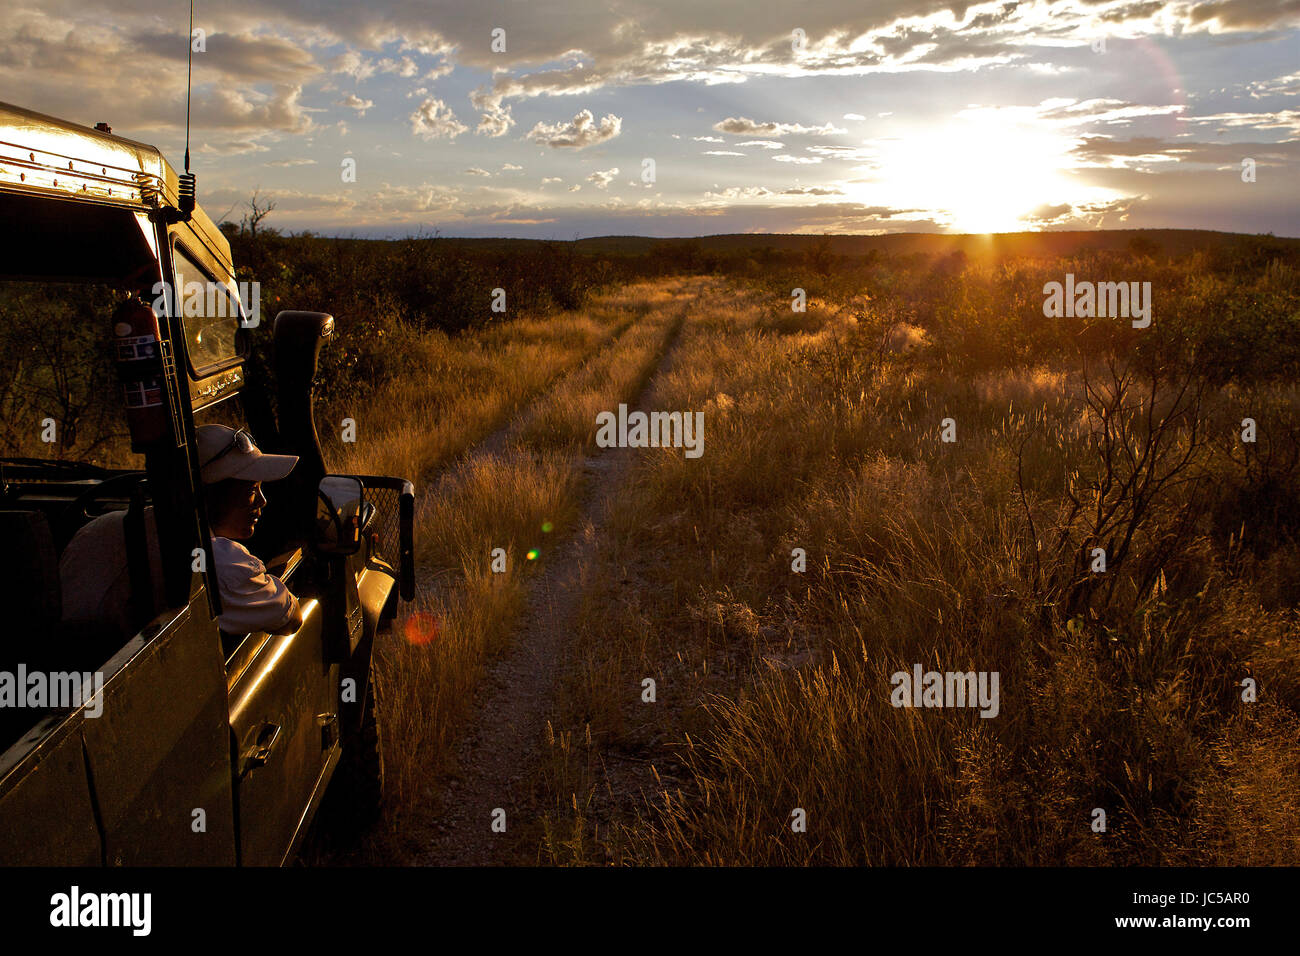 Watching sunset in Africa Stock Photo